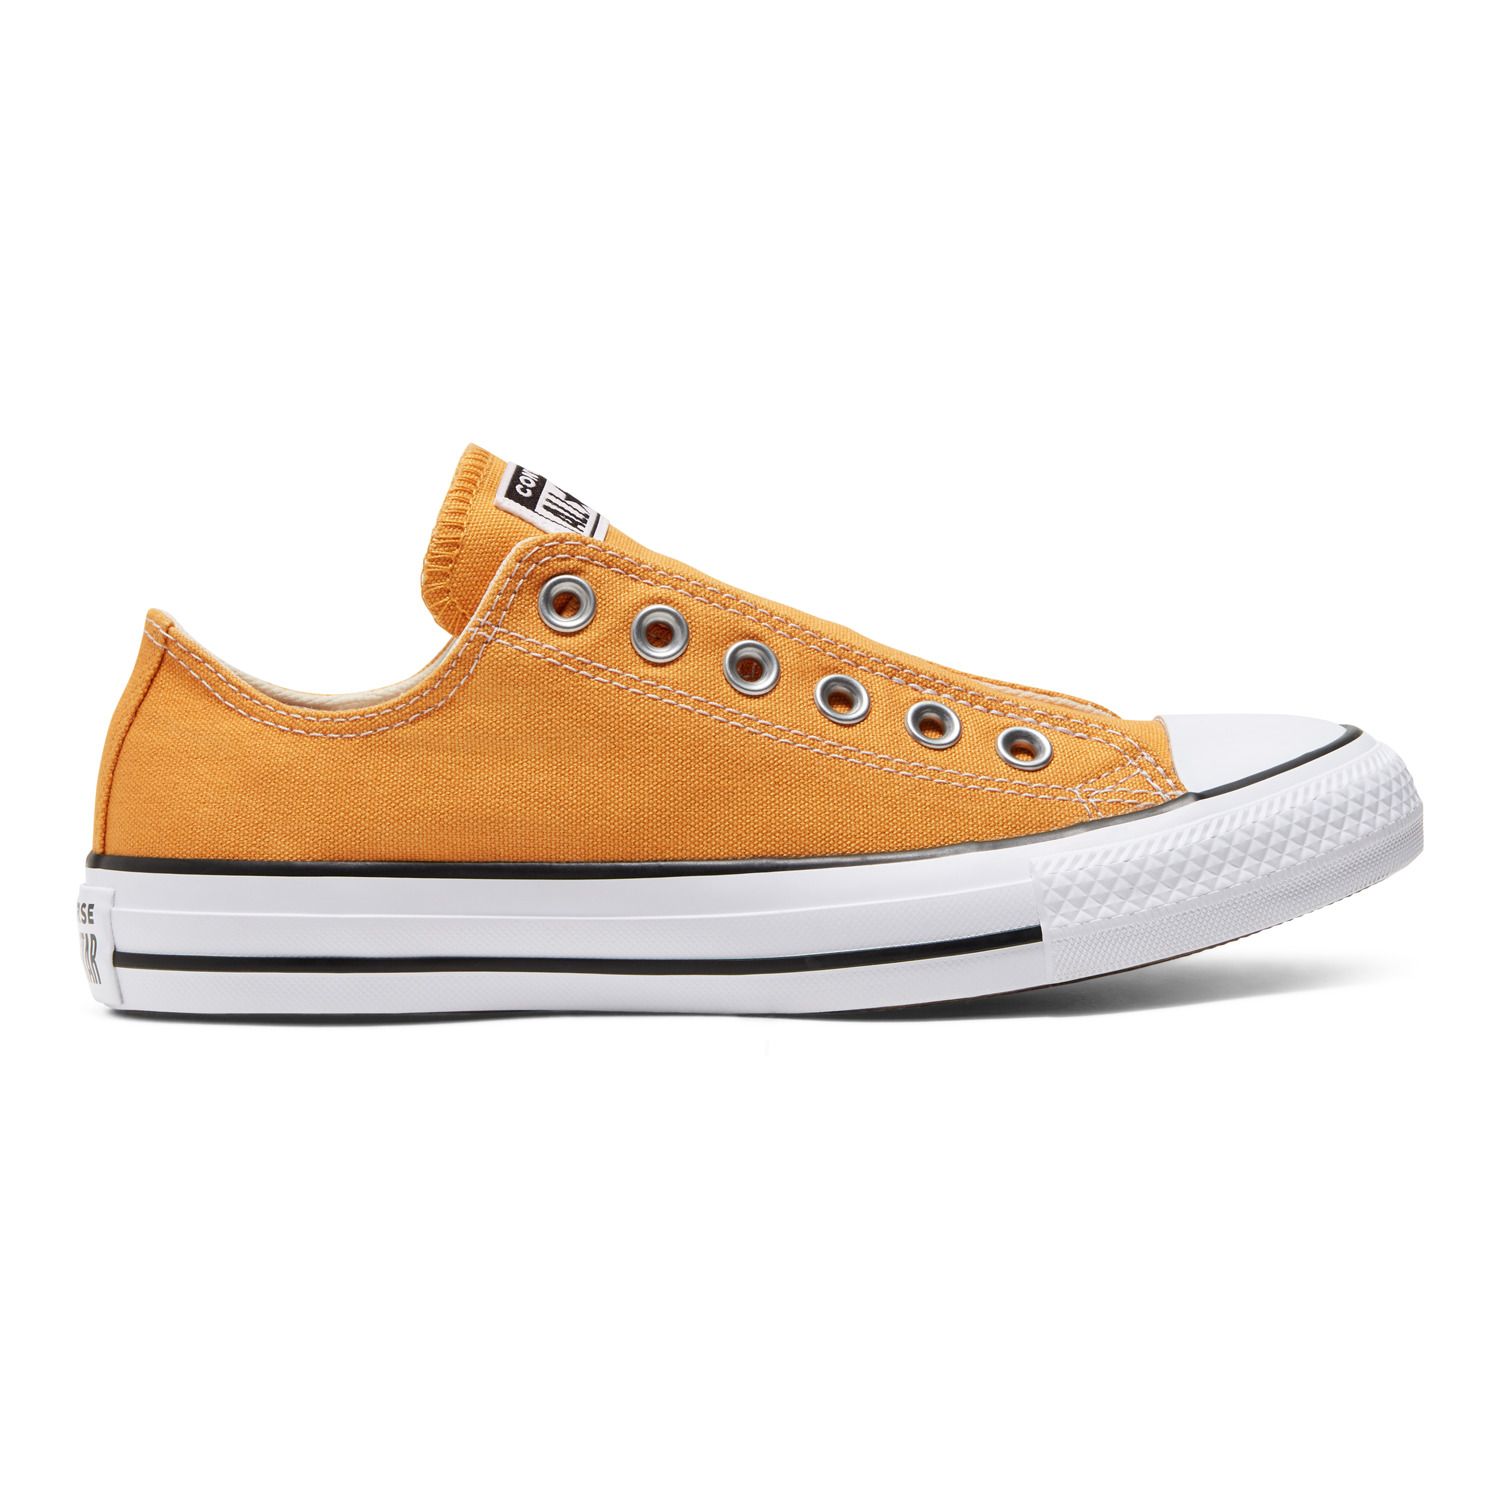 yellow converse all star low tops